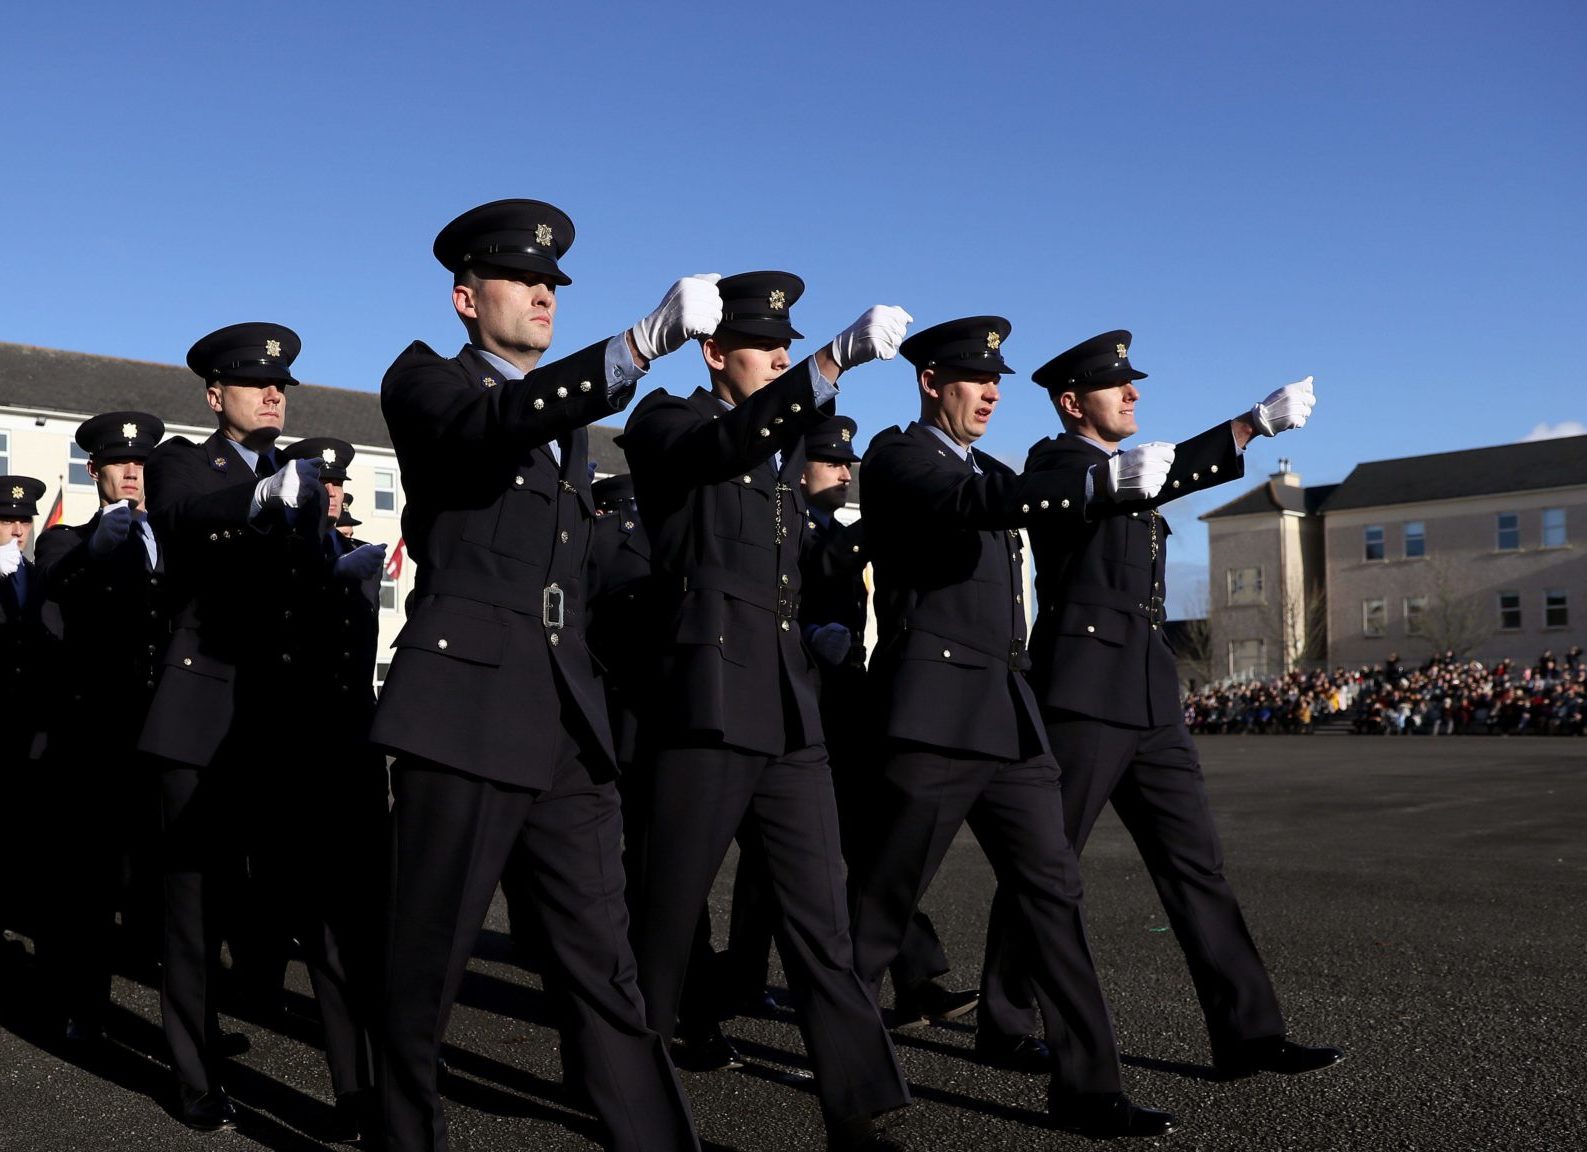 Garda graduates during a Passing Out ceremony at the Garda College, Co Tipperary in November 2019.